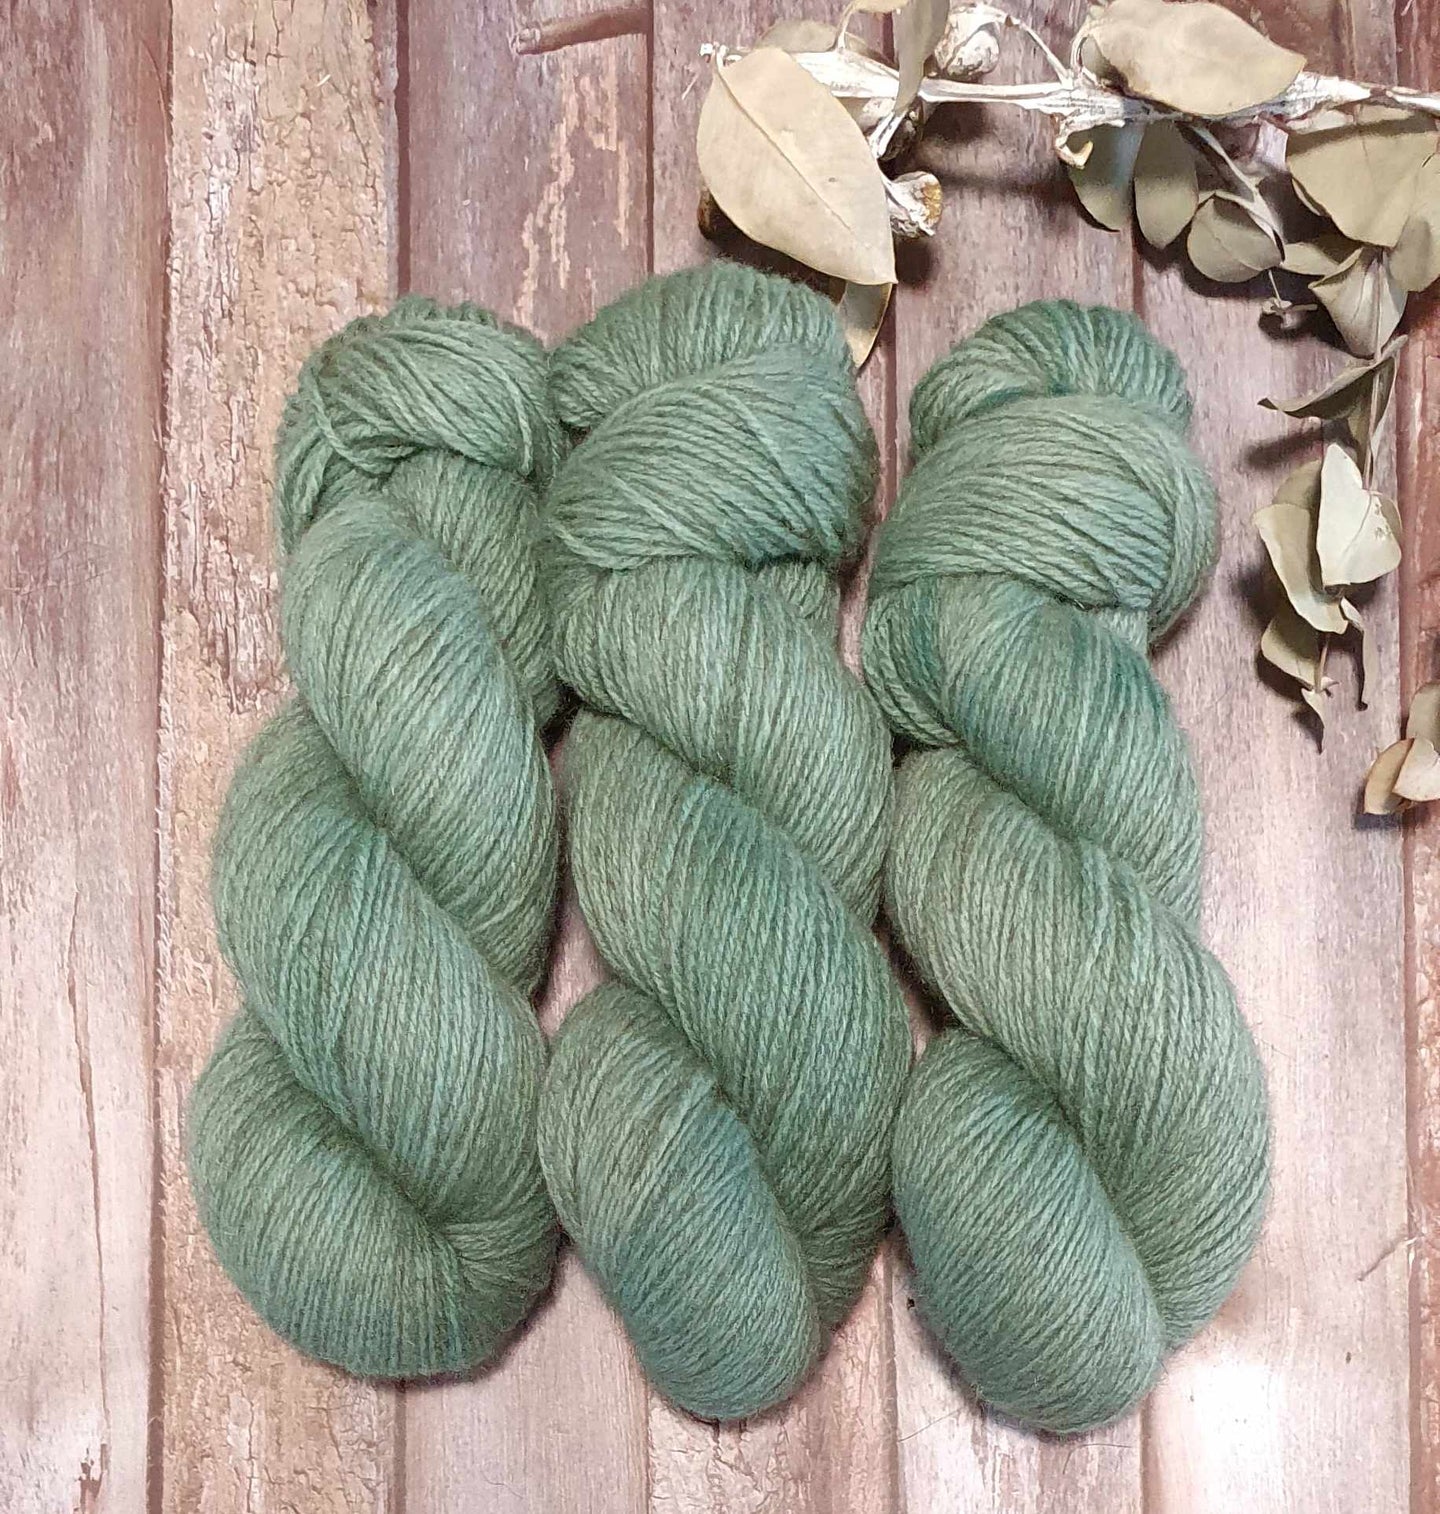 Tetragona Green (Baby Yeti 4ply) (Dyed as Ordered if Not in Stock)